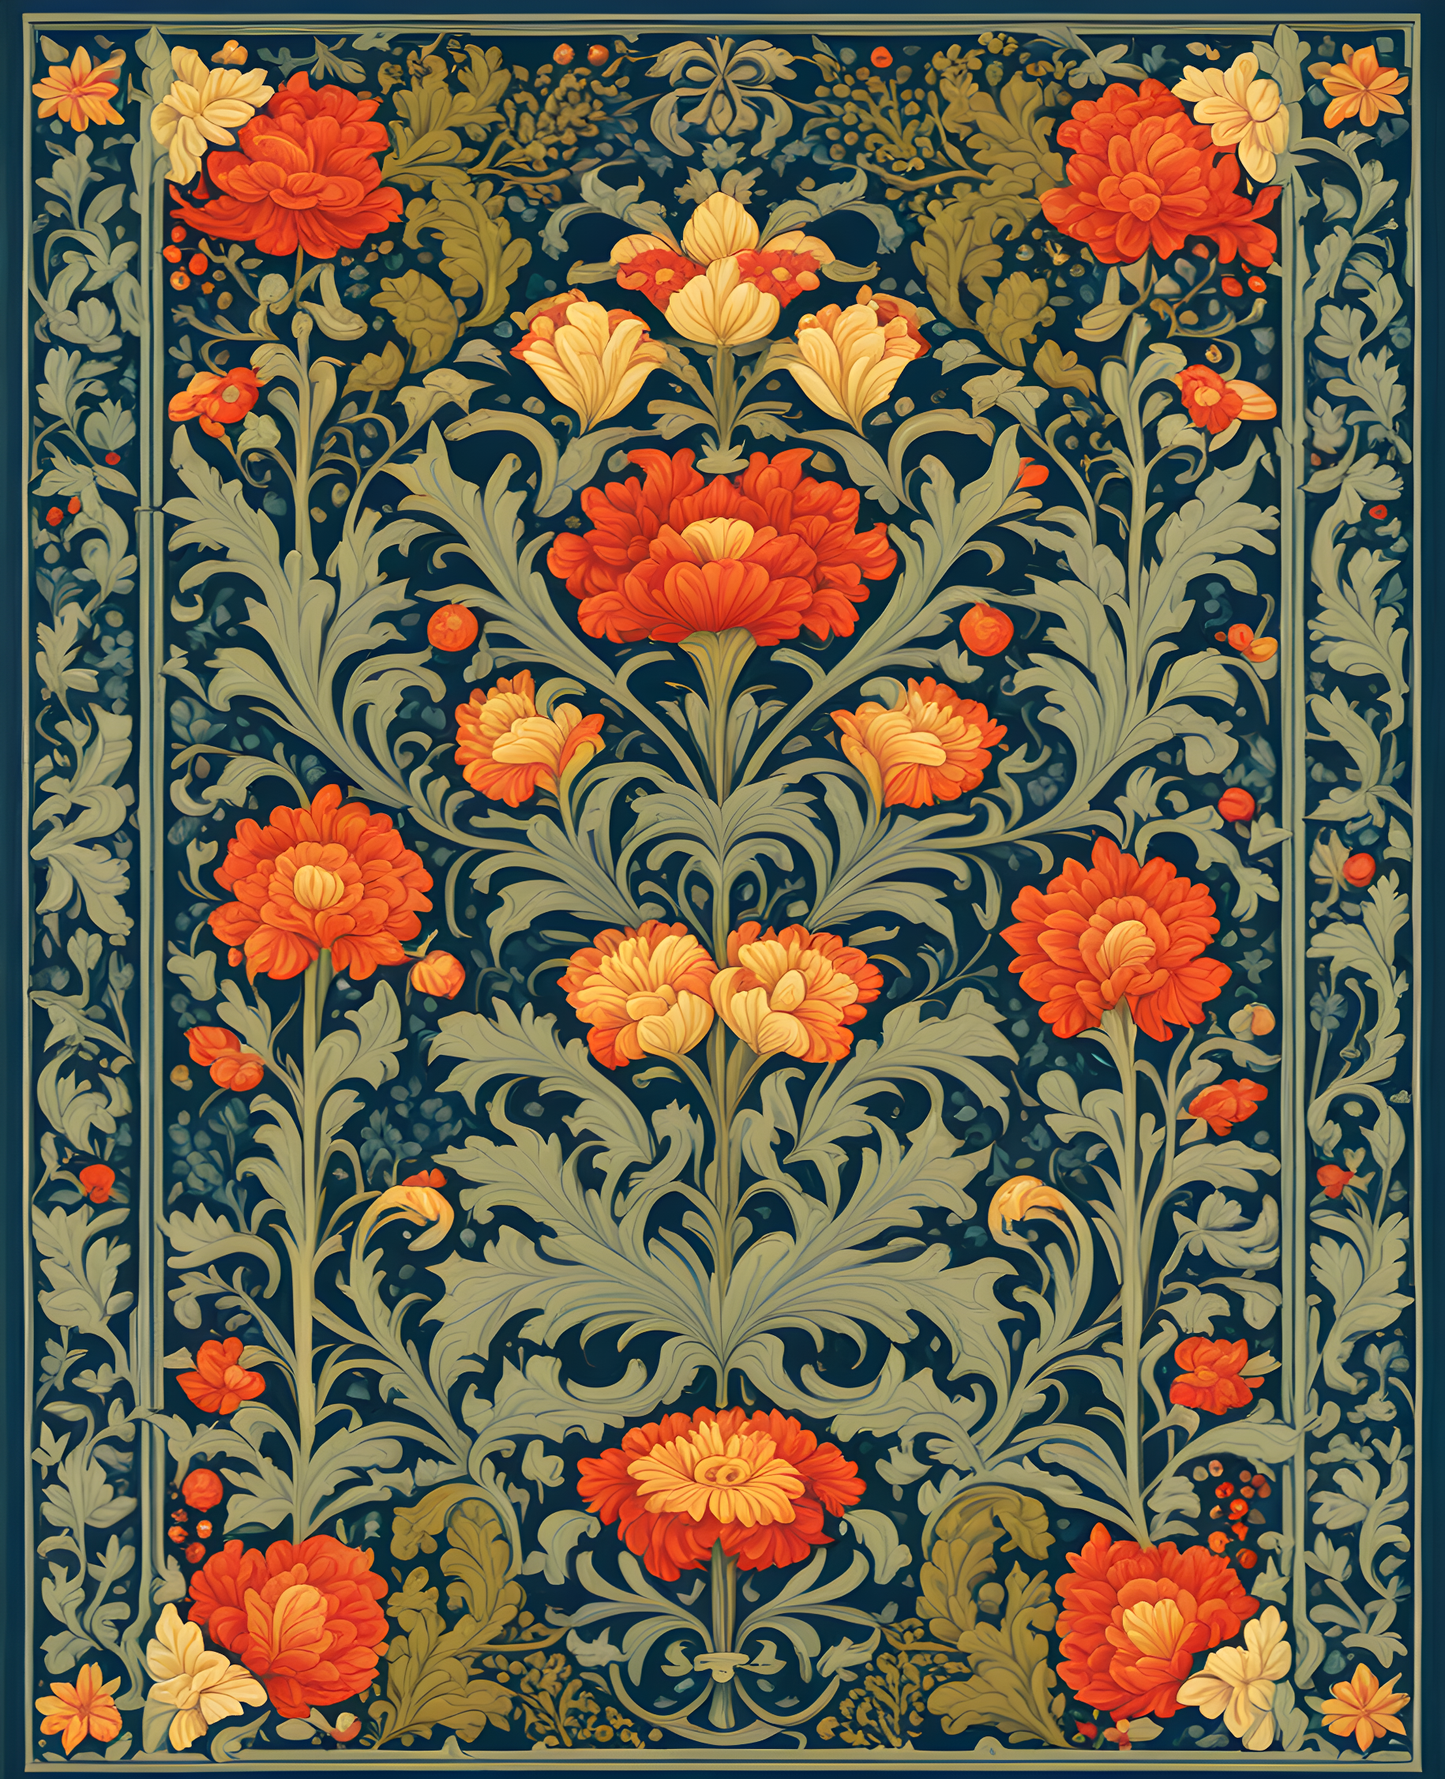 William Morris Style Collection PD (174) - The Saladin - Fabric Pattern - Van-Go Paint-By-Number Kit